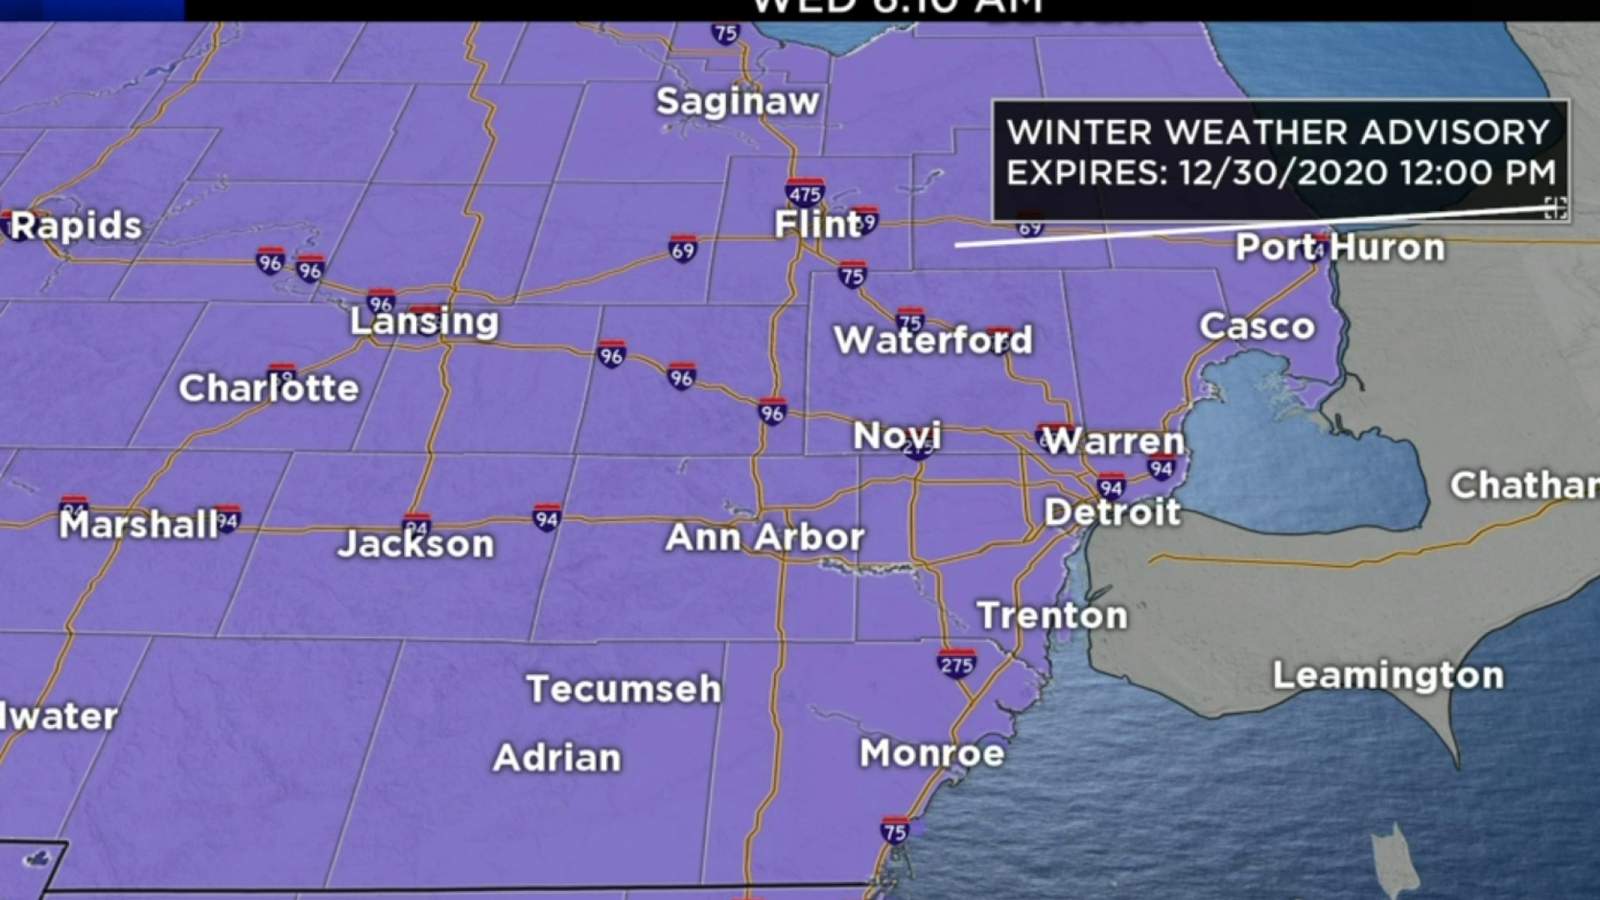 Metro Detroit weather: Winter Weather Advisory in effect with snow, icy conditions